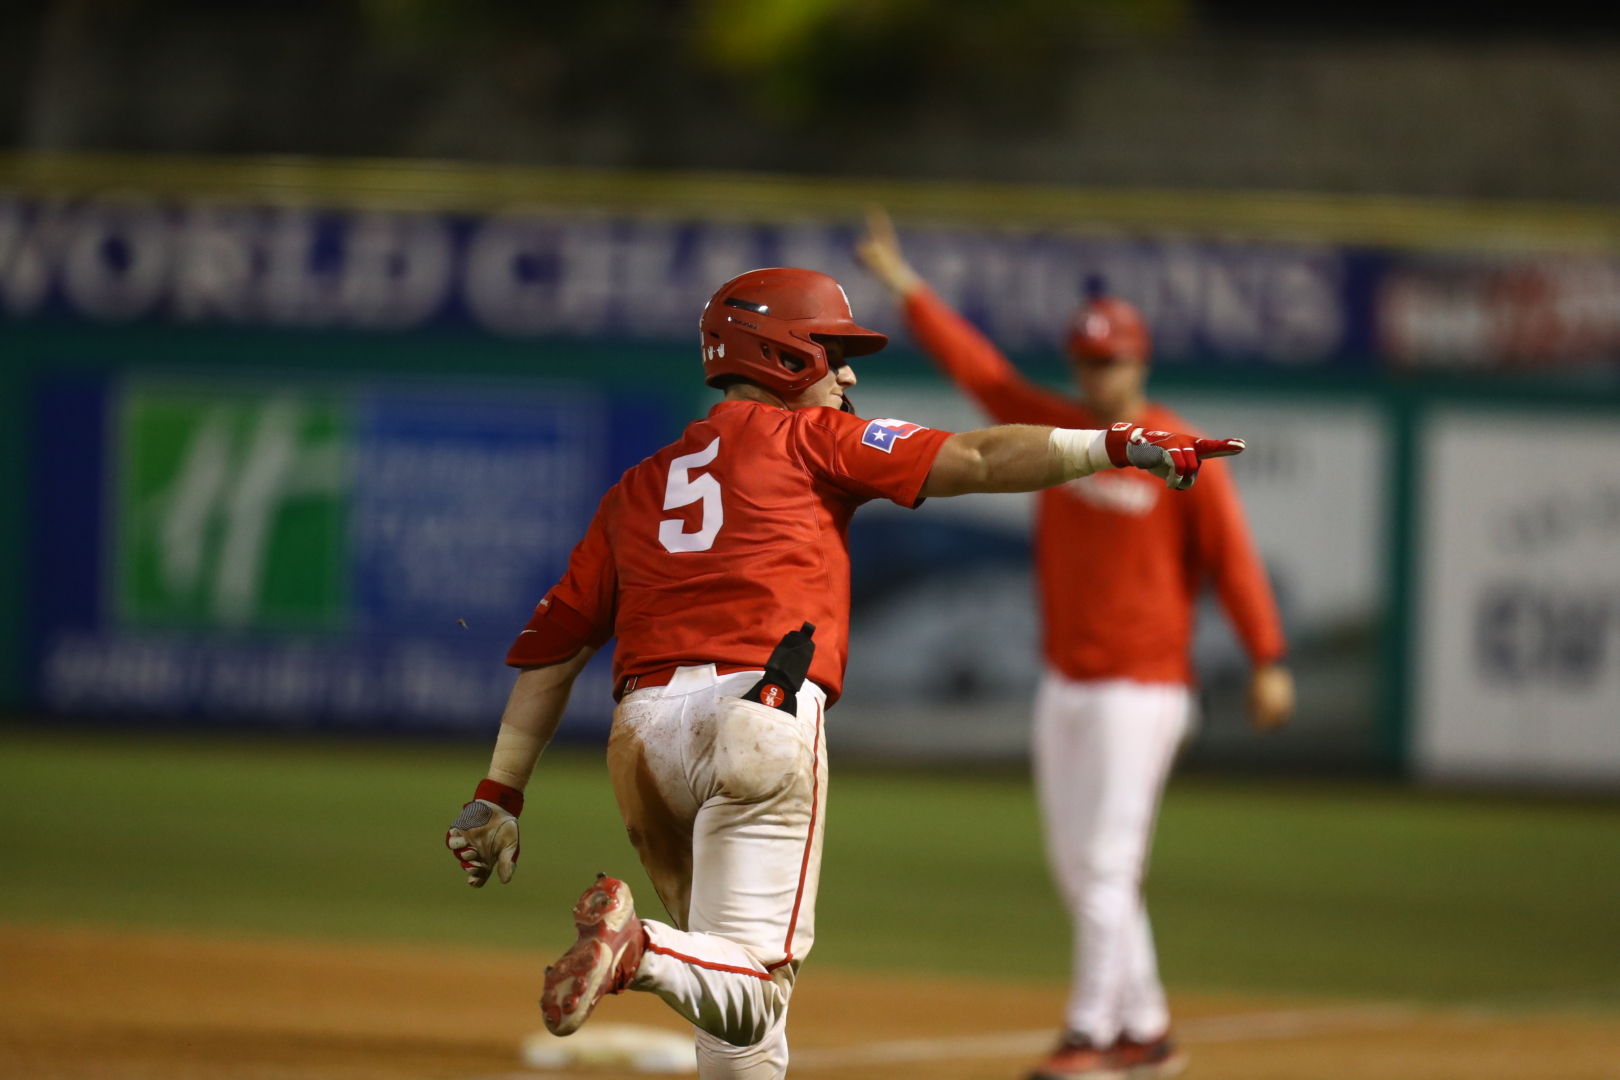 Anthony Tulimero points to the UH dugout after blasting the game-winning three-run homer in the top of the ninth on Saturday night to lift the Cougars over UCF and clinch a spot in the AAC tournament championship game. | Courtesy of American Athletic Conference/Mary Holt